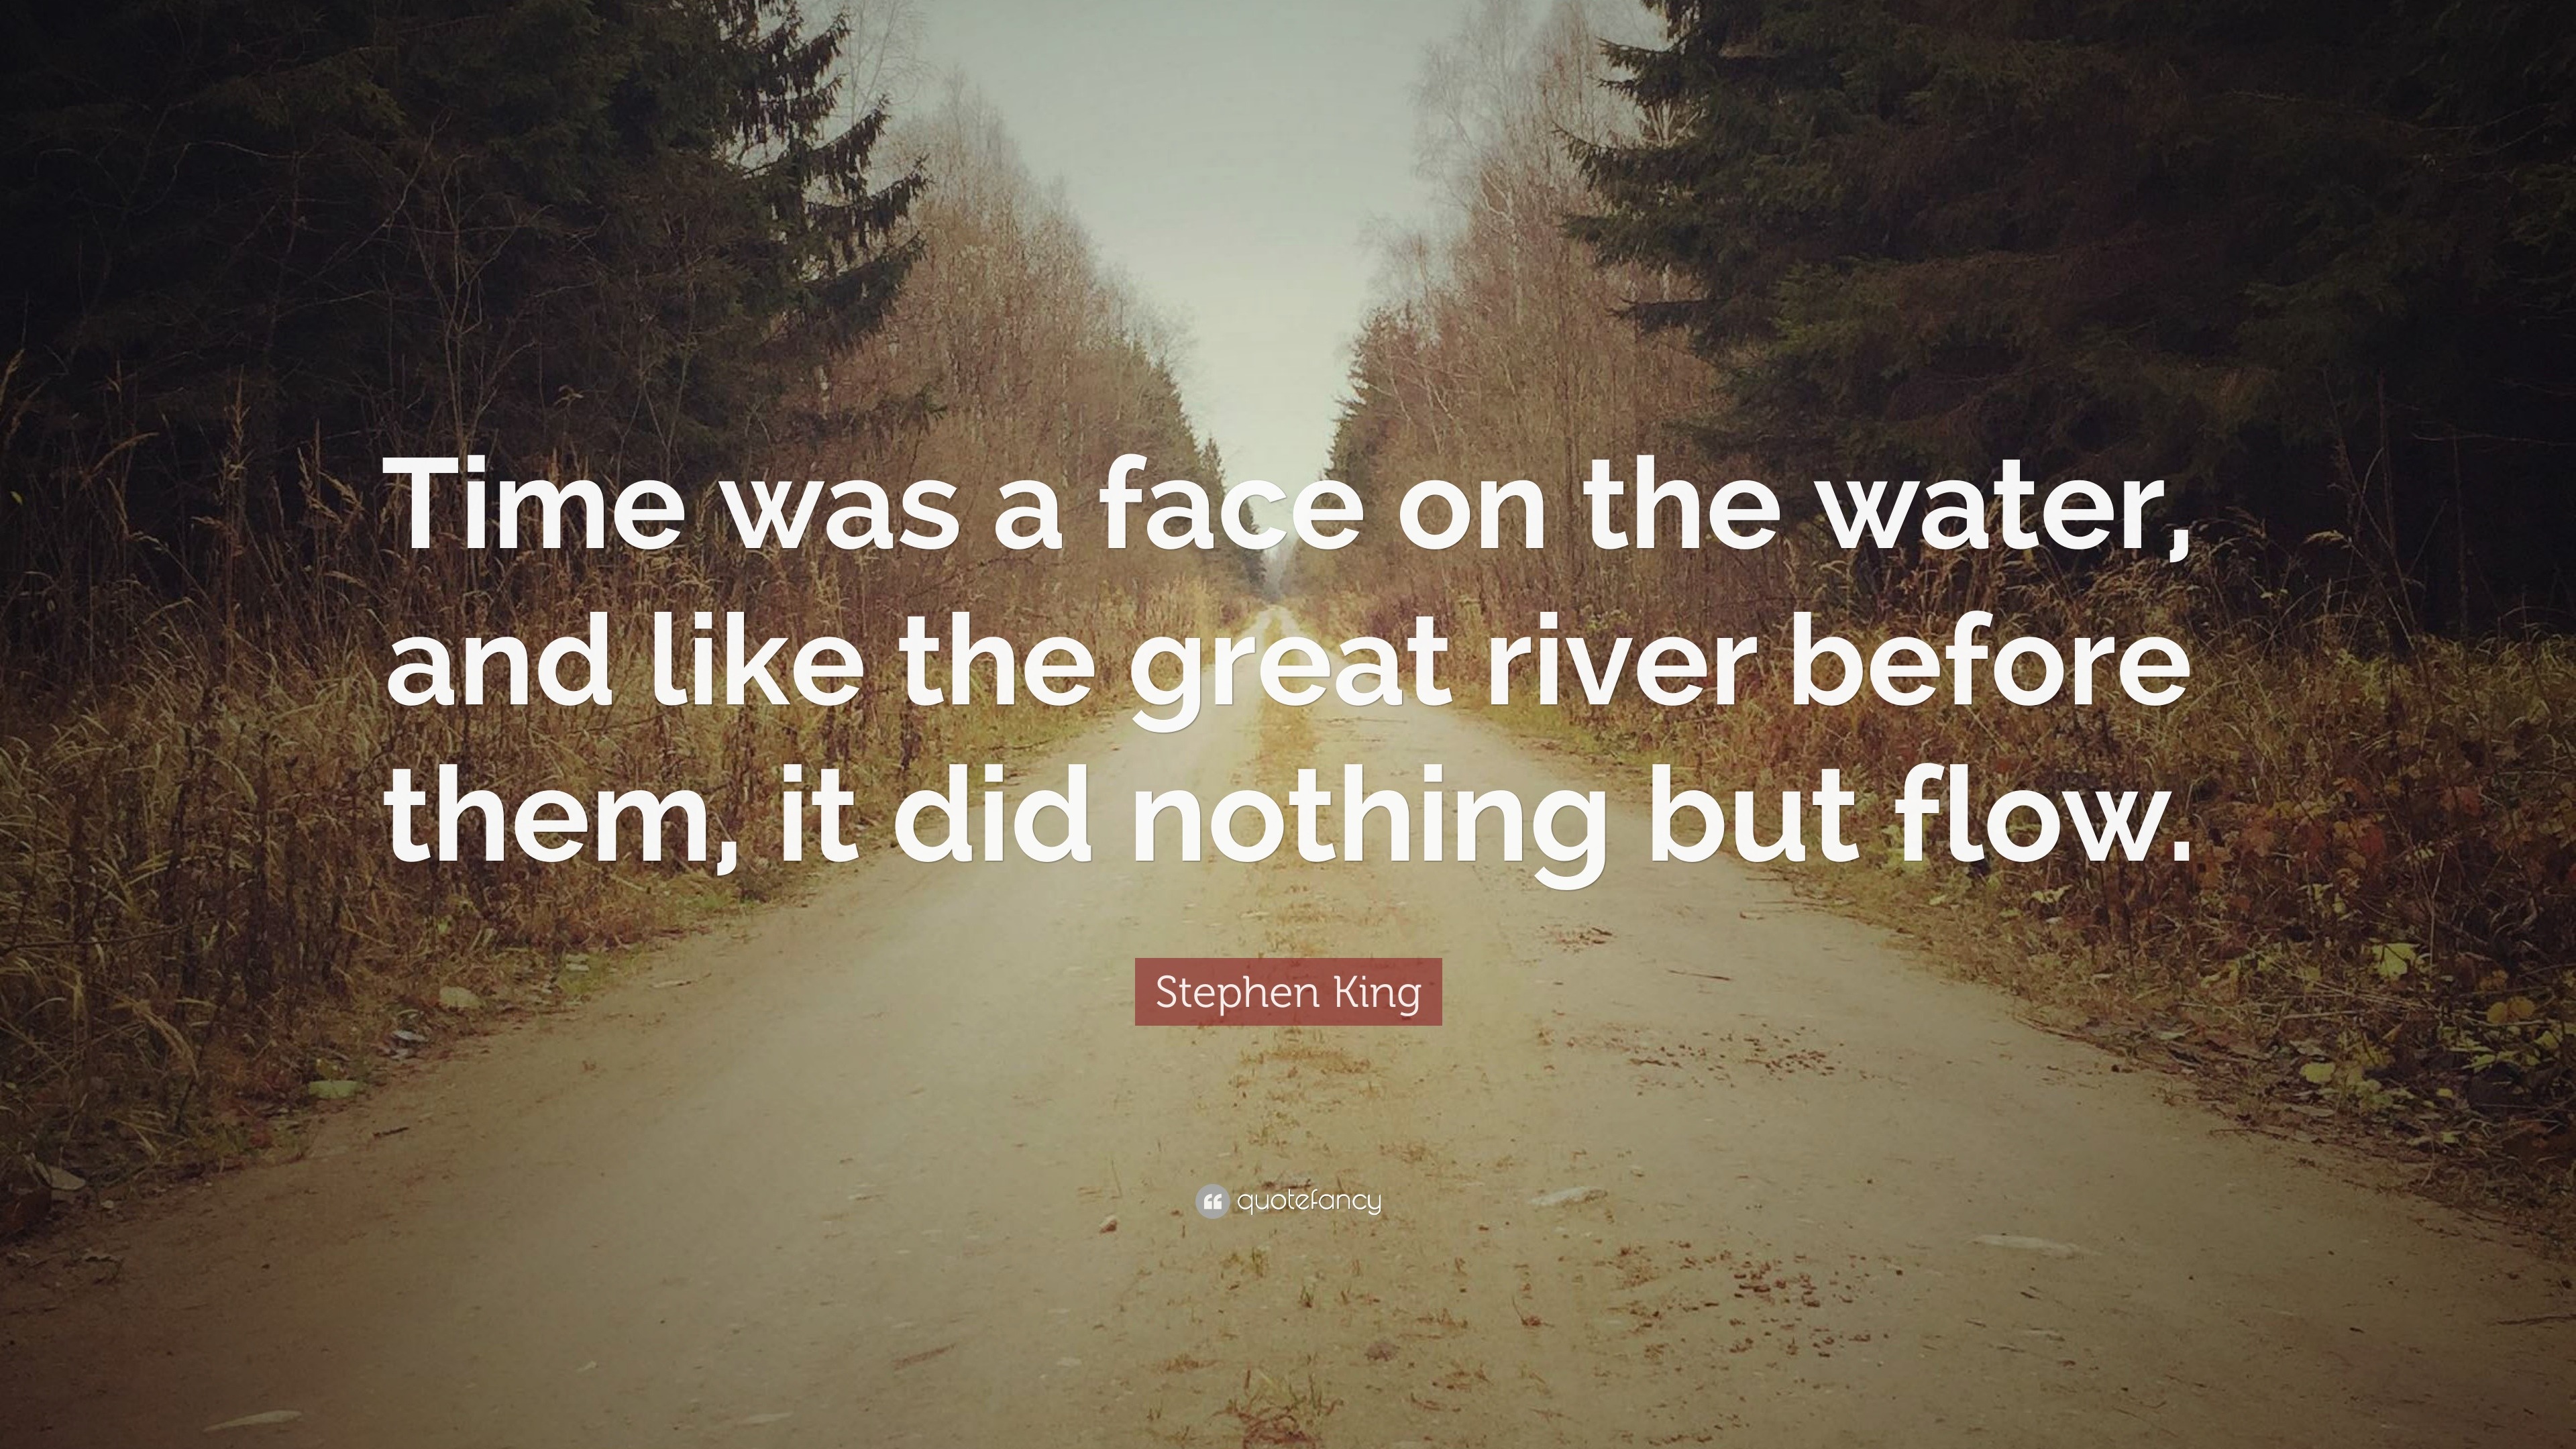 Stephen King Quote: “Time was a face on the water, and like the great ... Nothing Happens Before Its Time Quotes